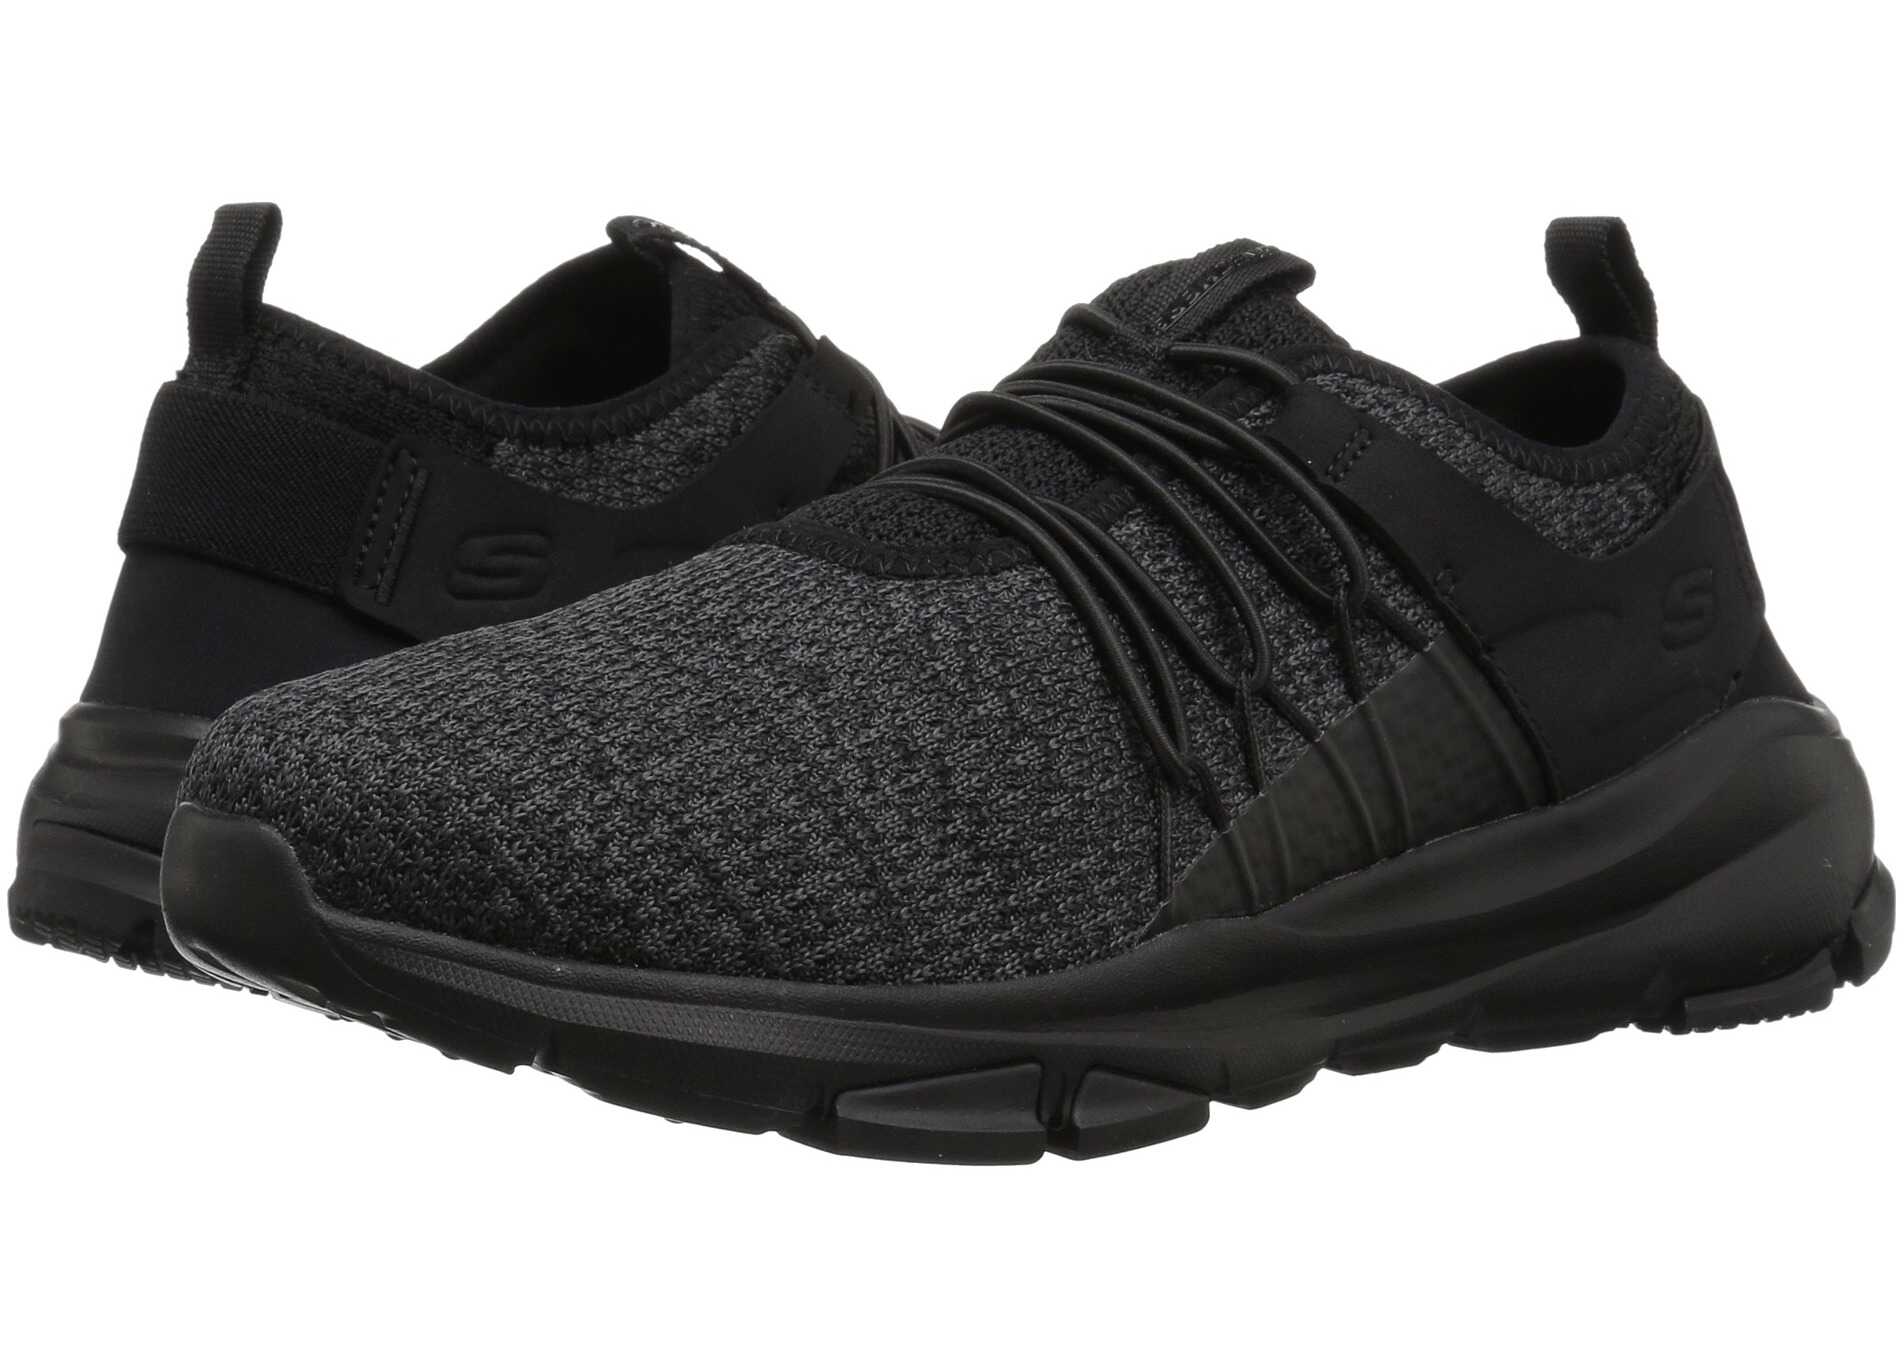 SKECHERS Relaxed Fit®: Soven - Lorado Black